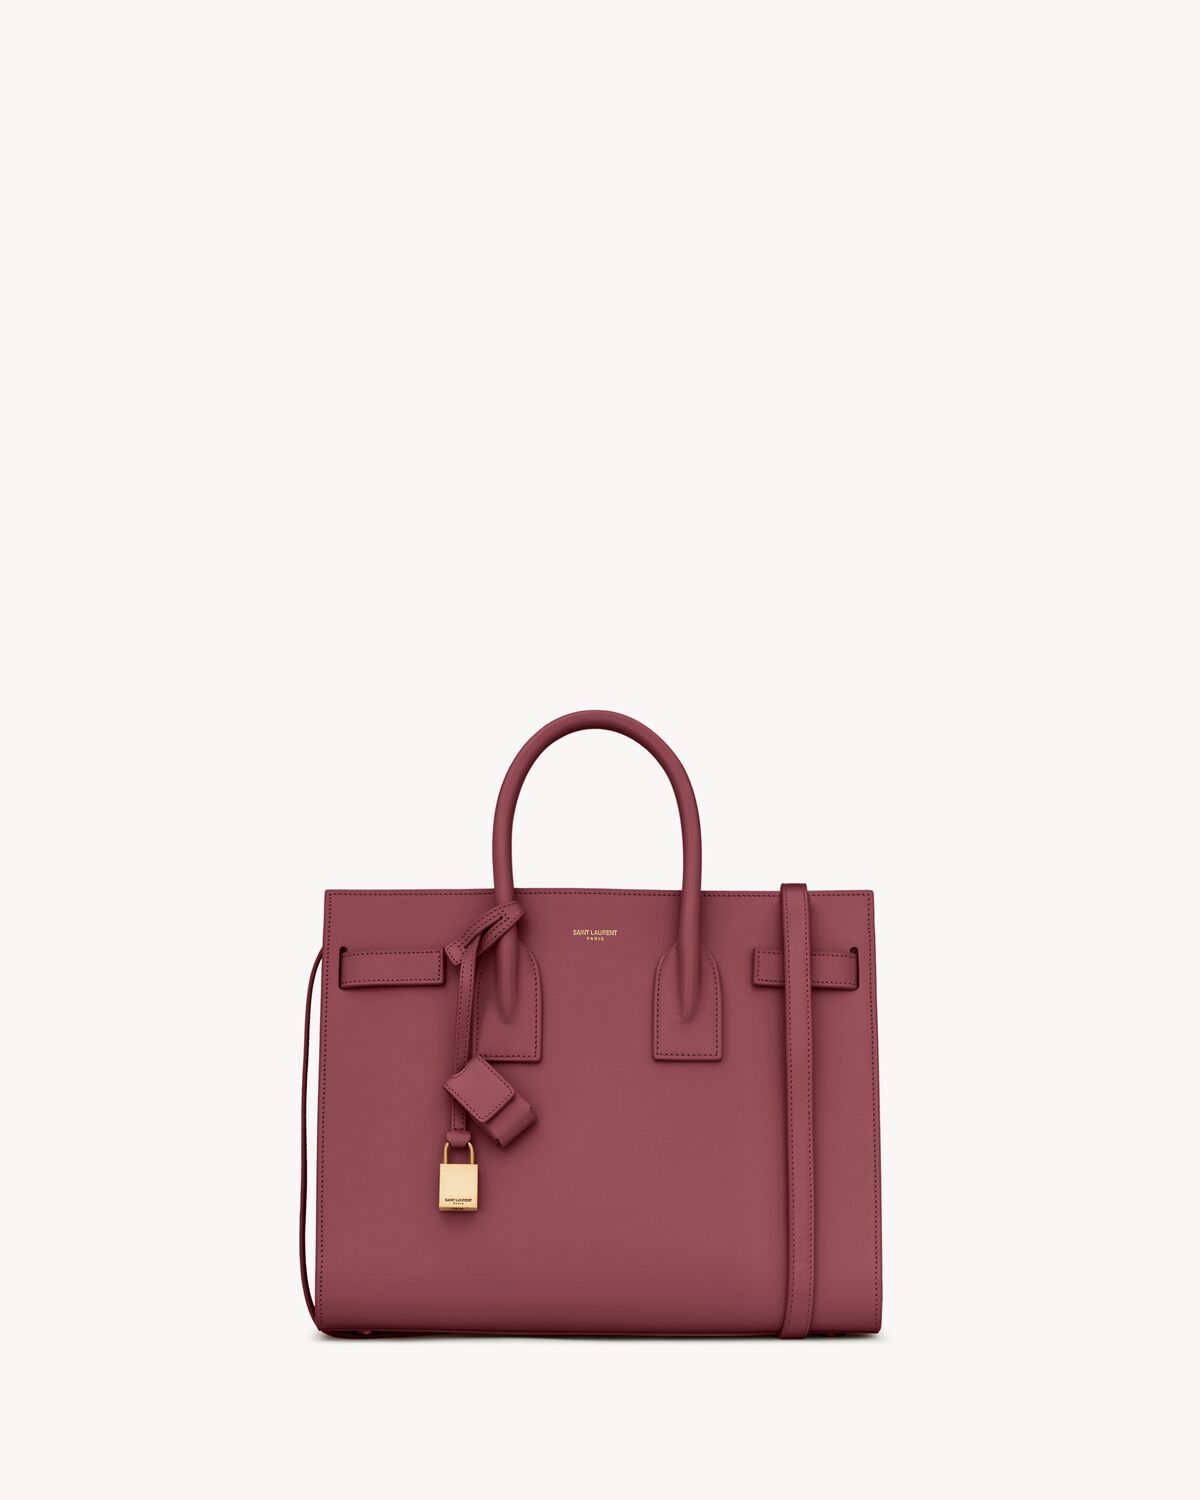 SAC DE JOUR SMALL IN SMOOTH LEATHER